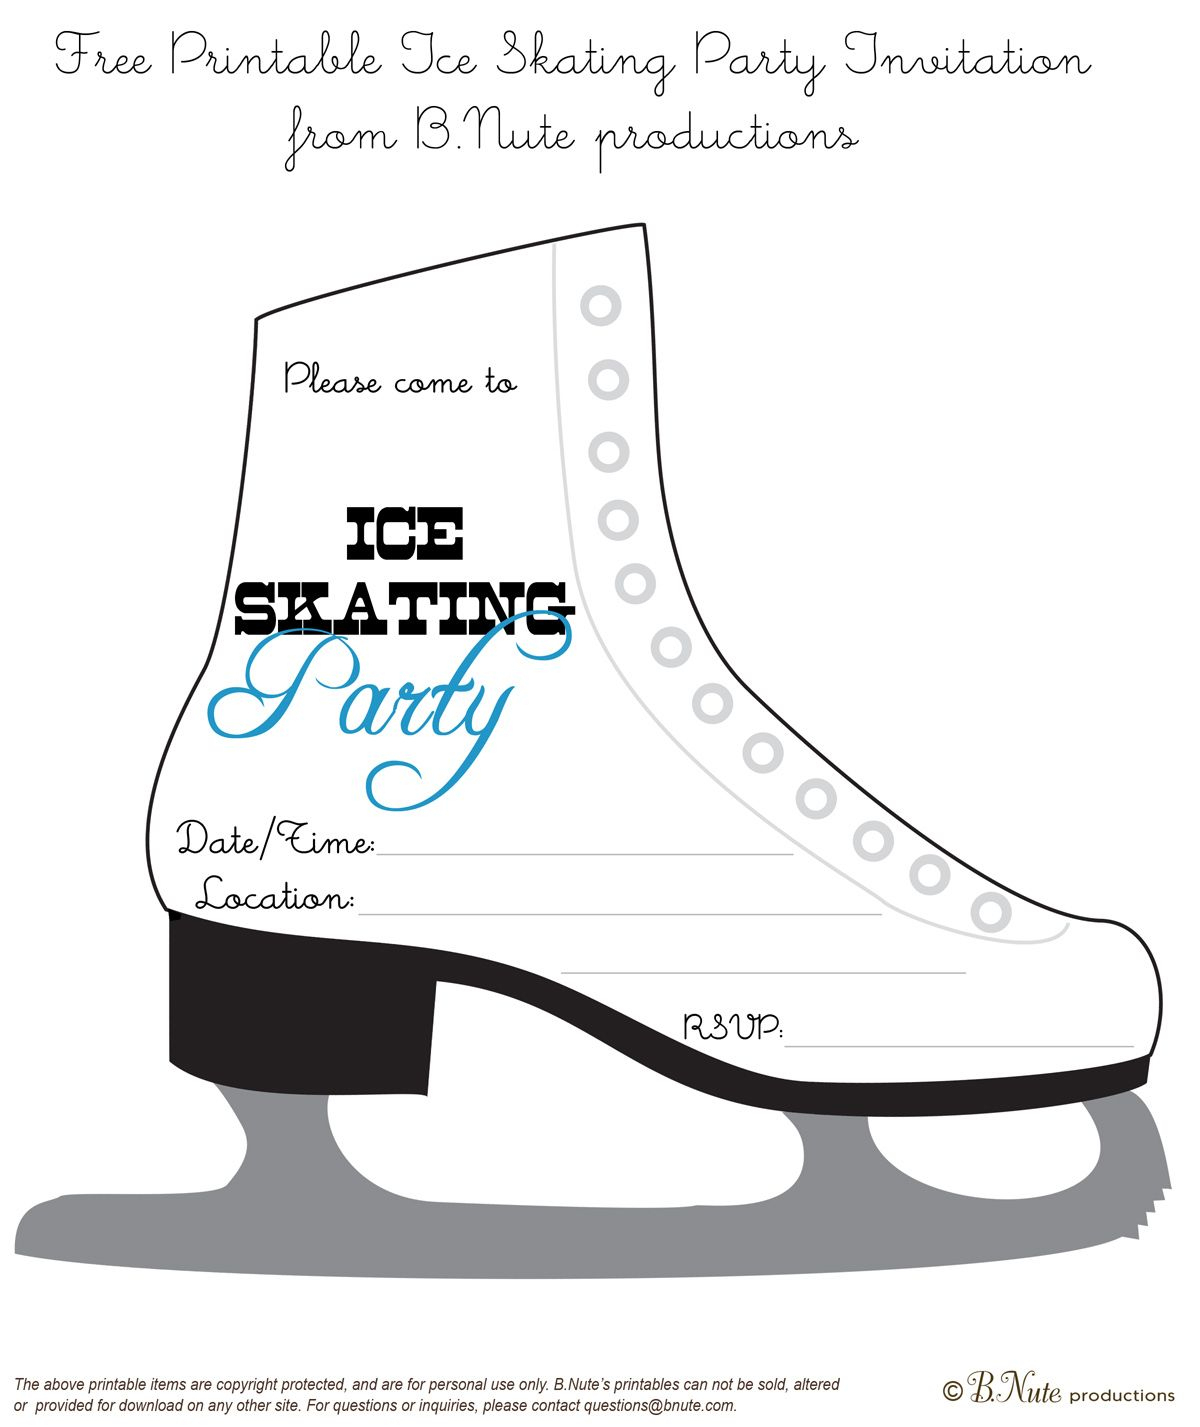 Bnute Productions: Free Printable Ice Skating Party Invitation - Free Printable Skateboard Birthday Party Invitations